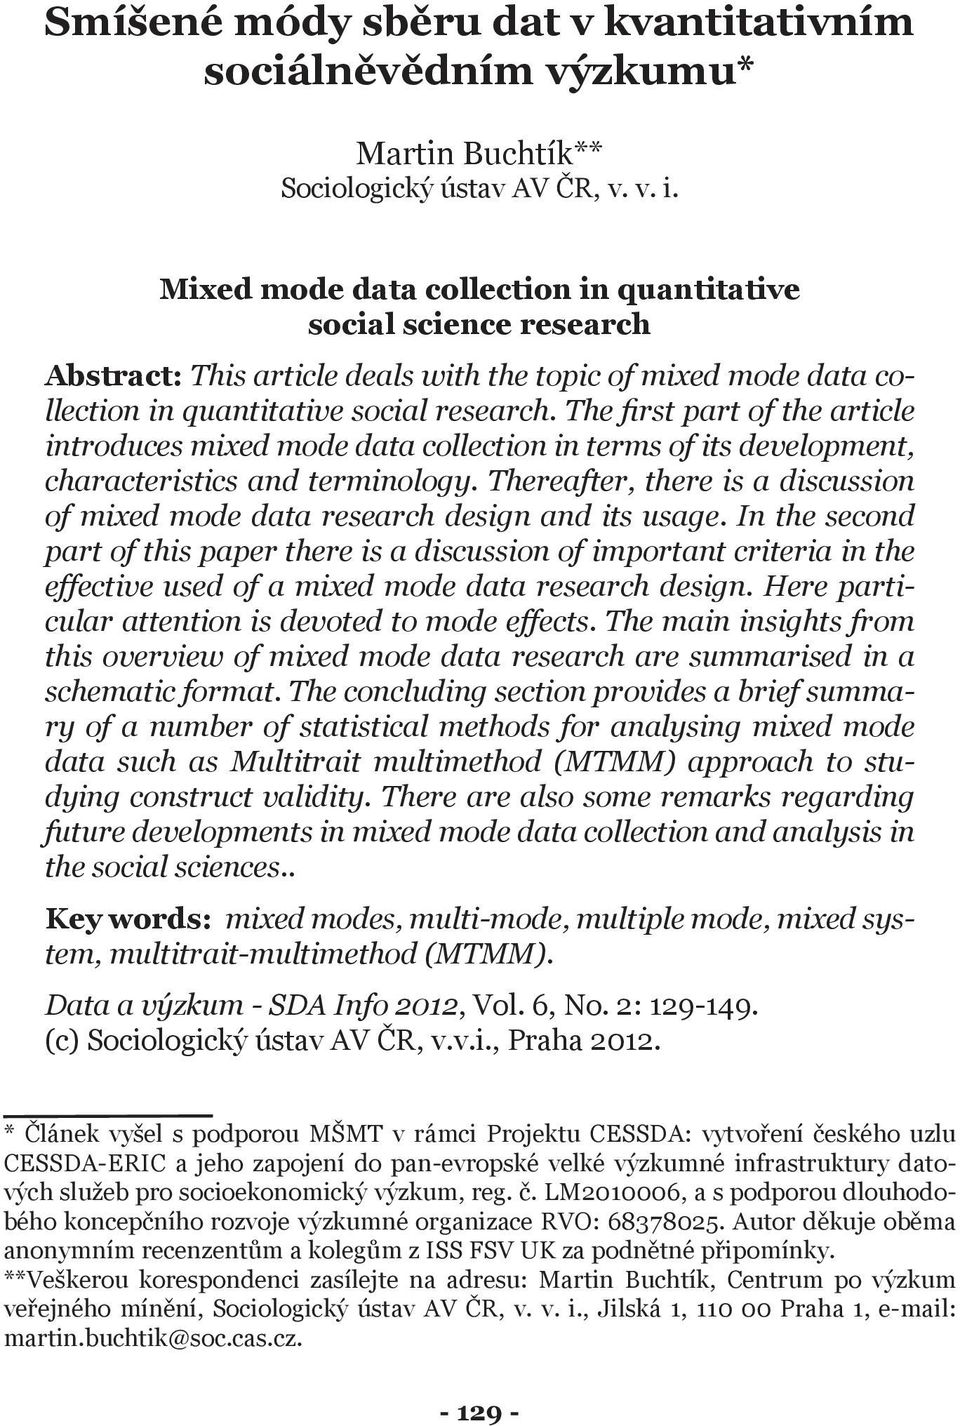 The first part of the article introduces mixed mode data collection in terms of its development, characteristics and terminology.